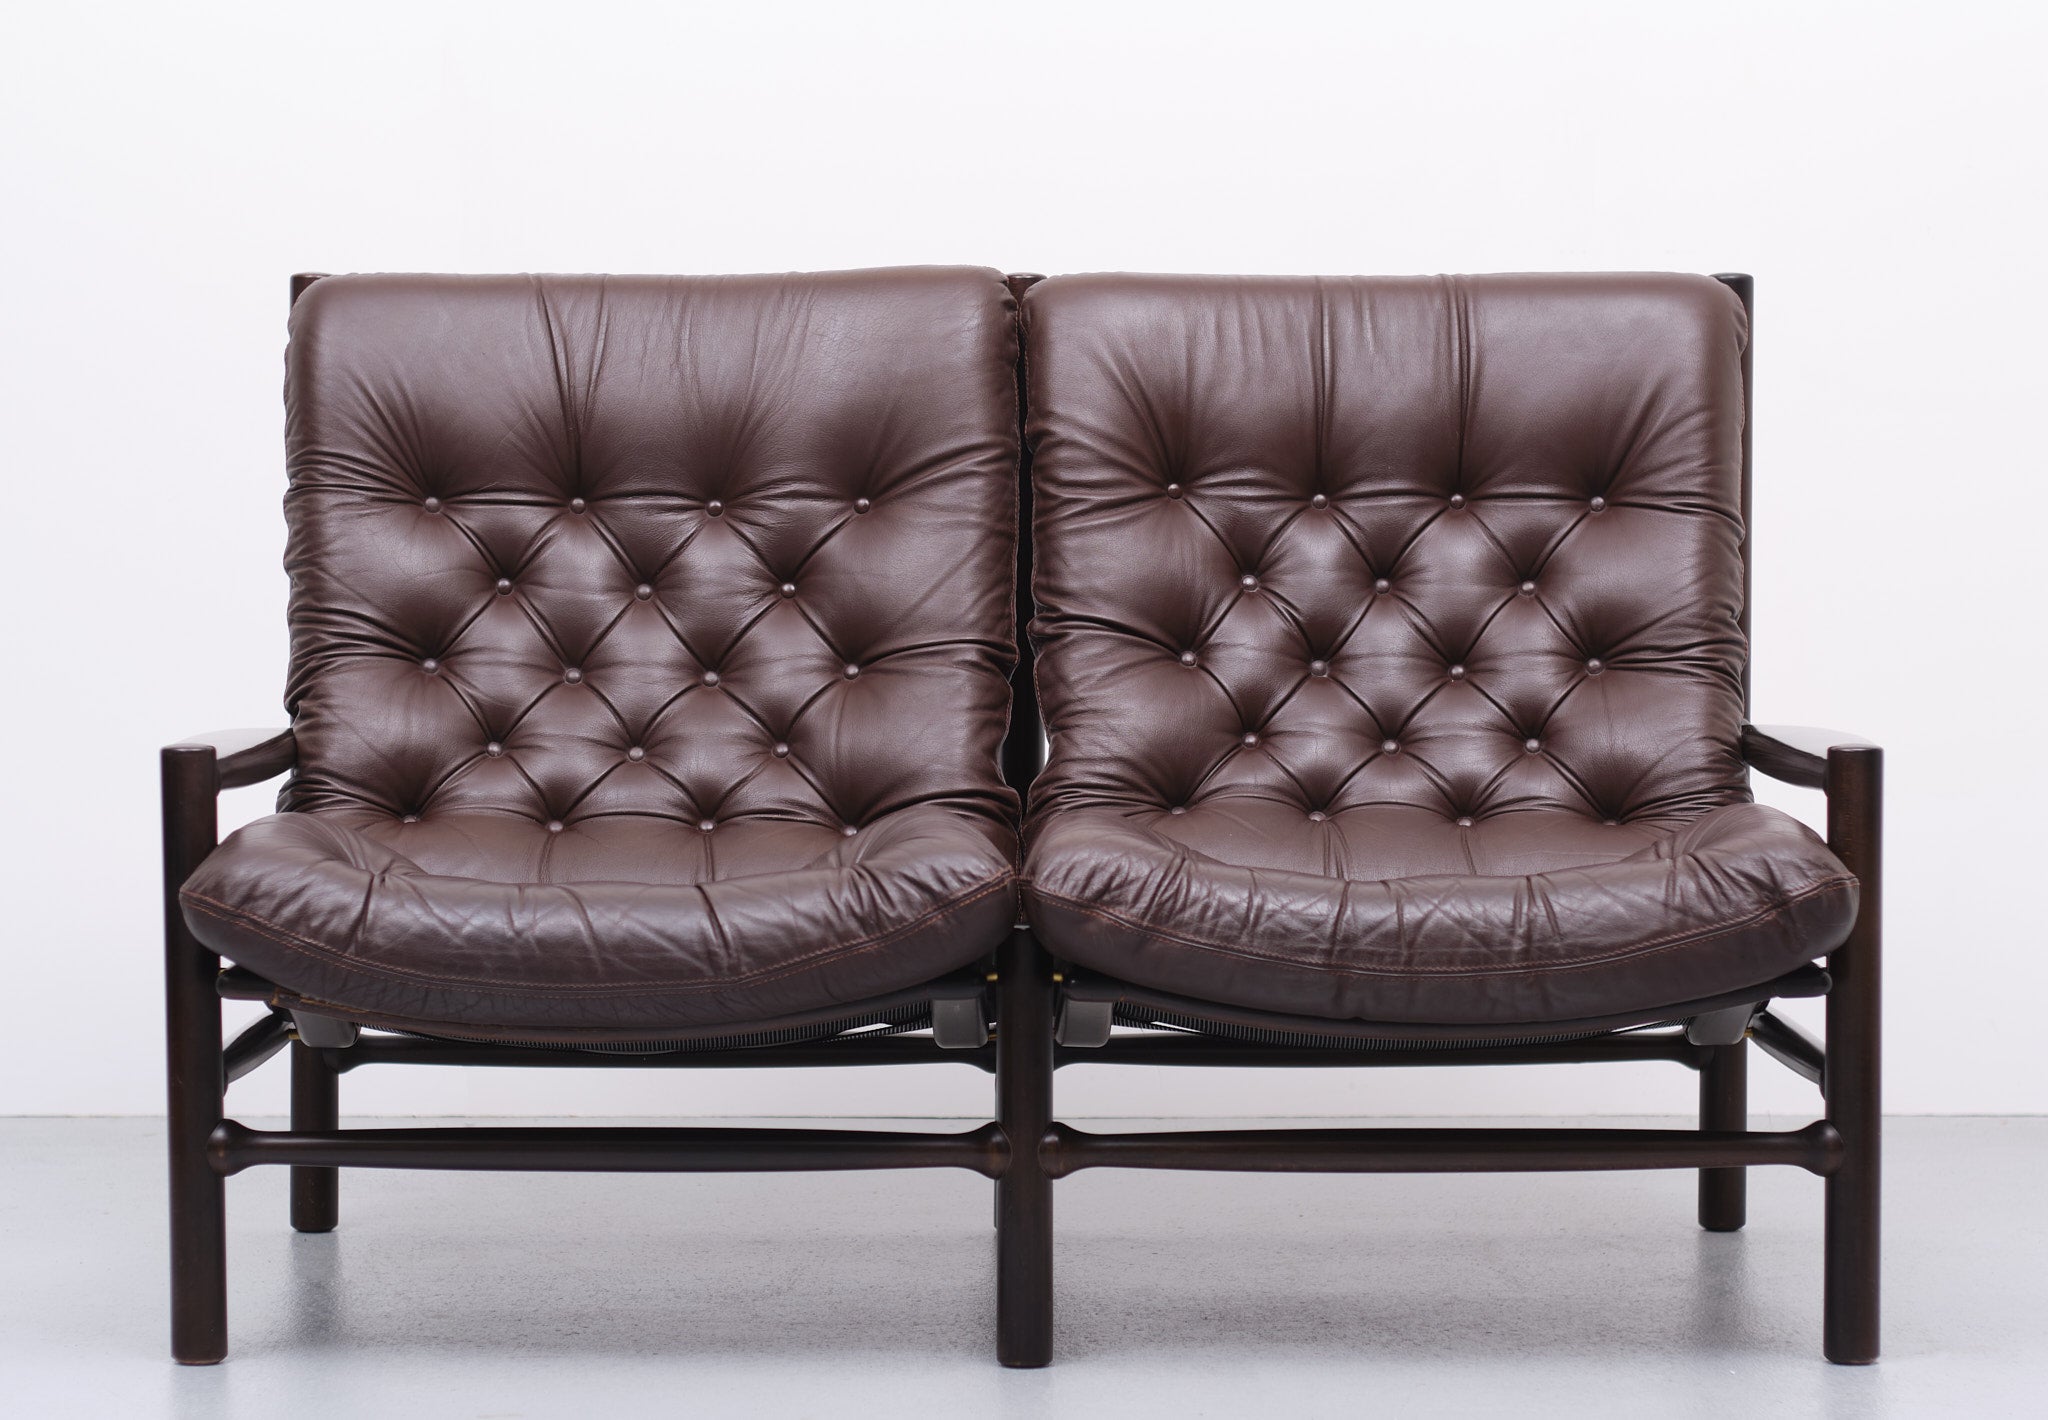 Very nice luxurious two seater sofa. Solid wood frame, comes with a smooth capped leather in a mocha brown color. Top quality sofa. Very good condition. 
Designed by Arne Norell for coja 1970s Good seating comfort.

 